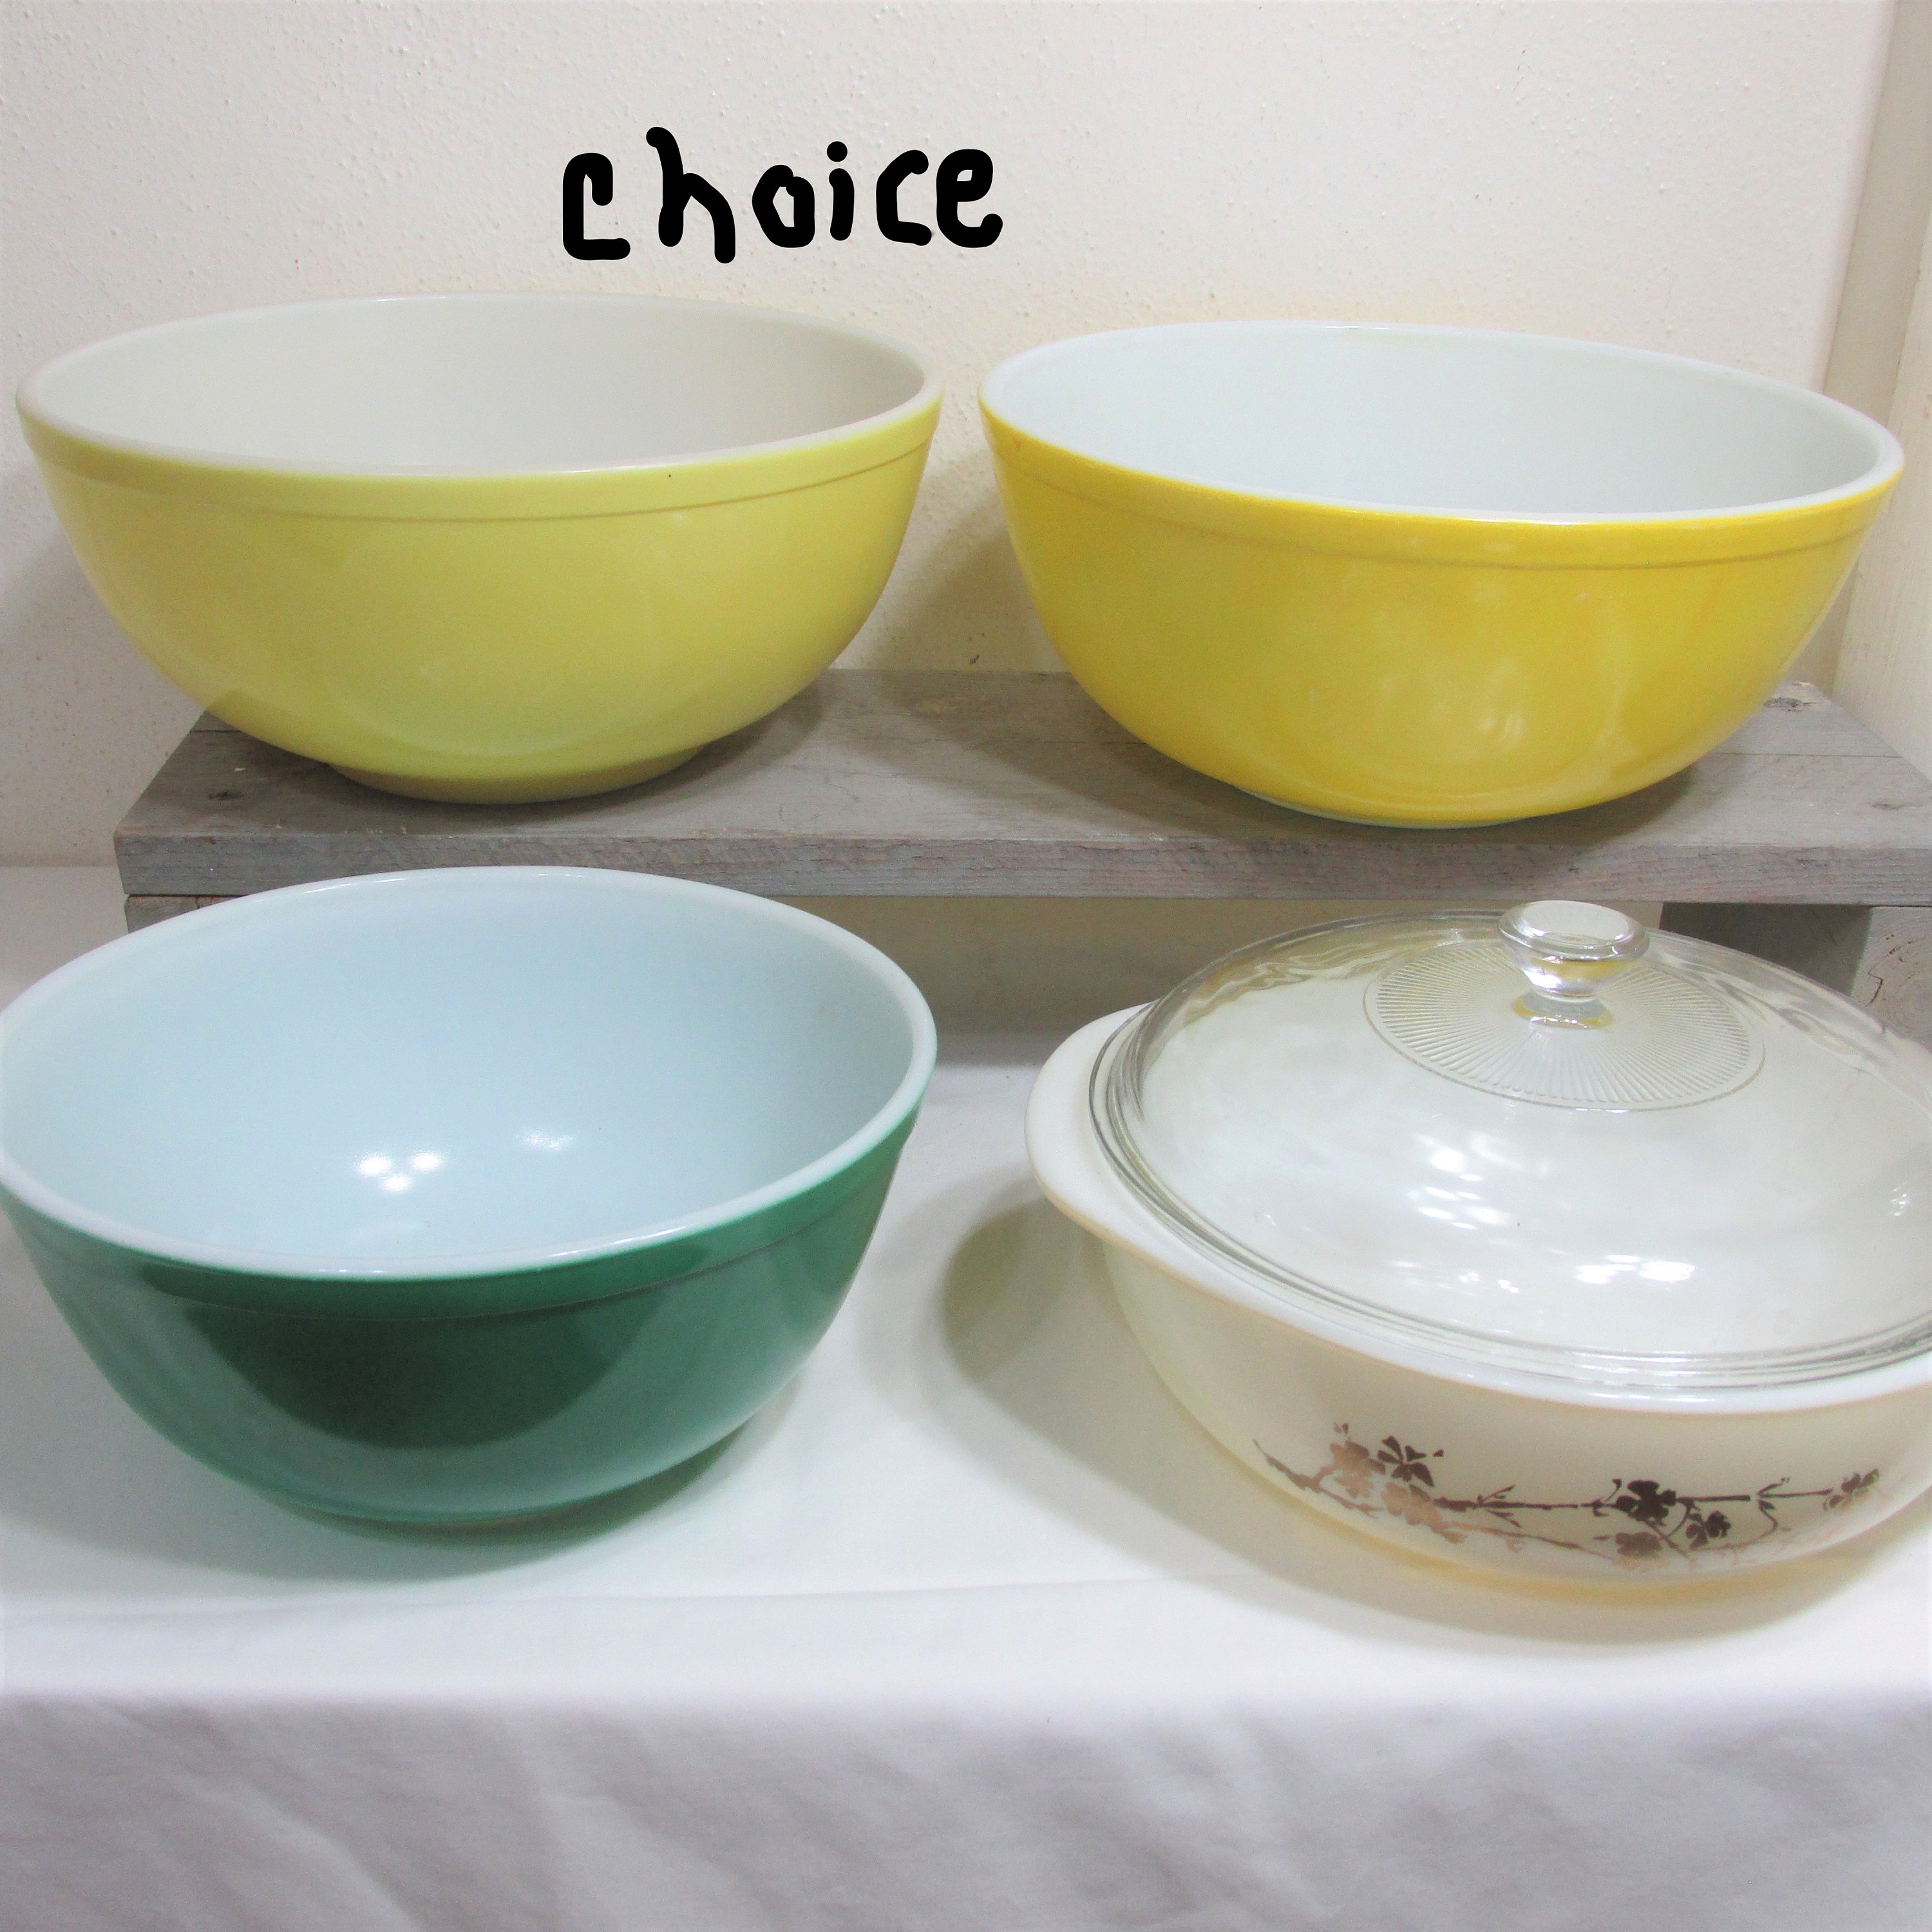 Pyrex Early Pre 1950 Multi Color Set Primary Green Mixing Bowl - Ruby Lane